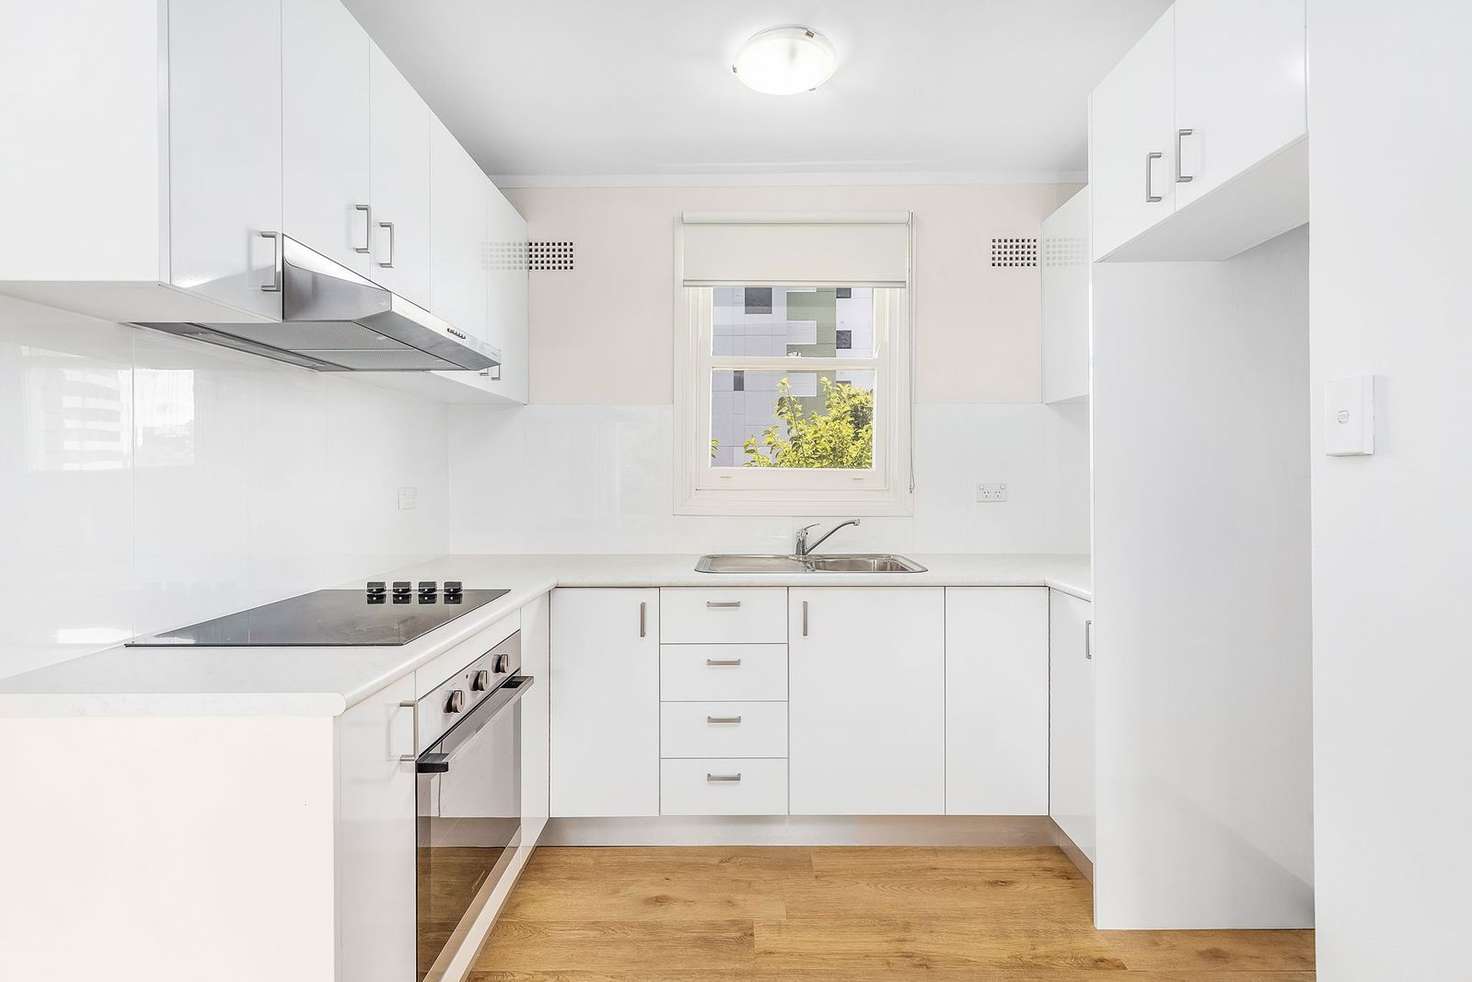 Main view of Homely unit listing, 11/4 Parnell St, Strathfield NSW 2135